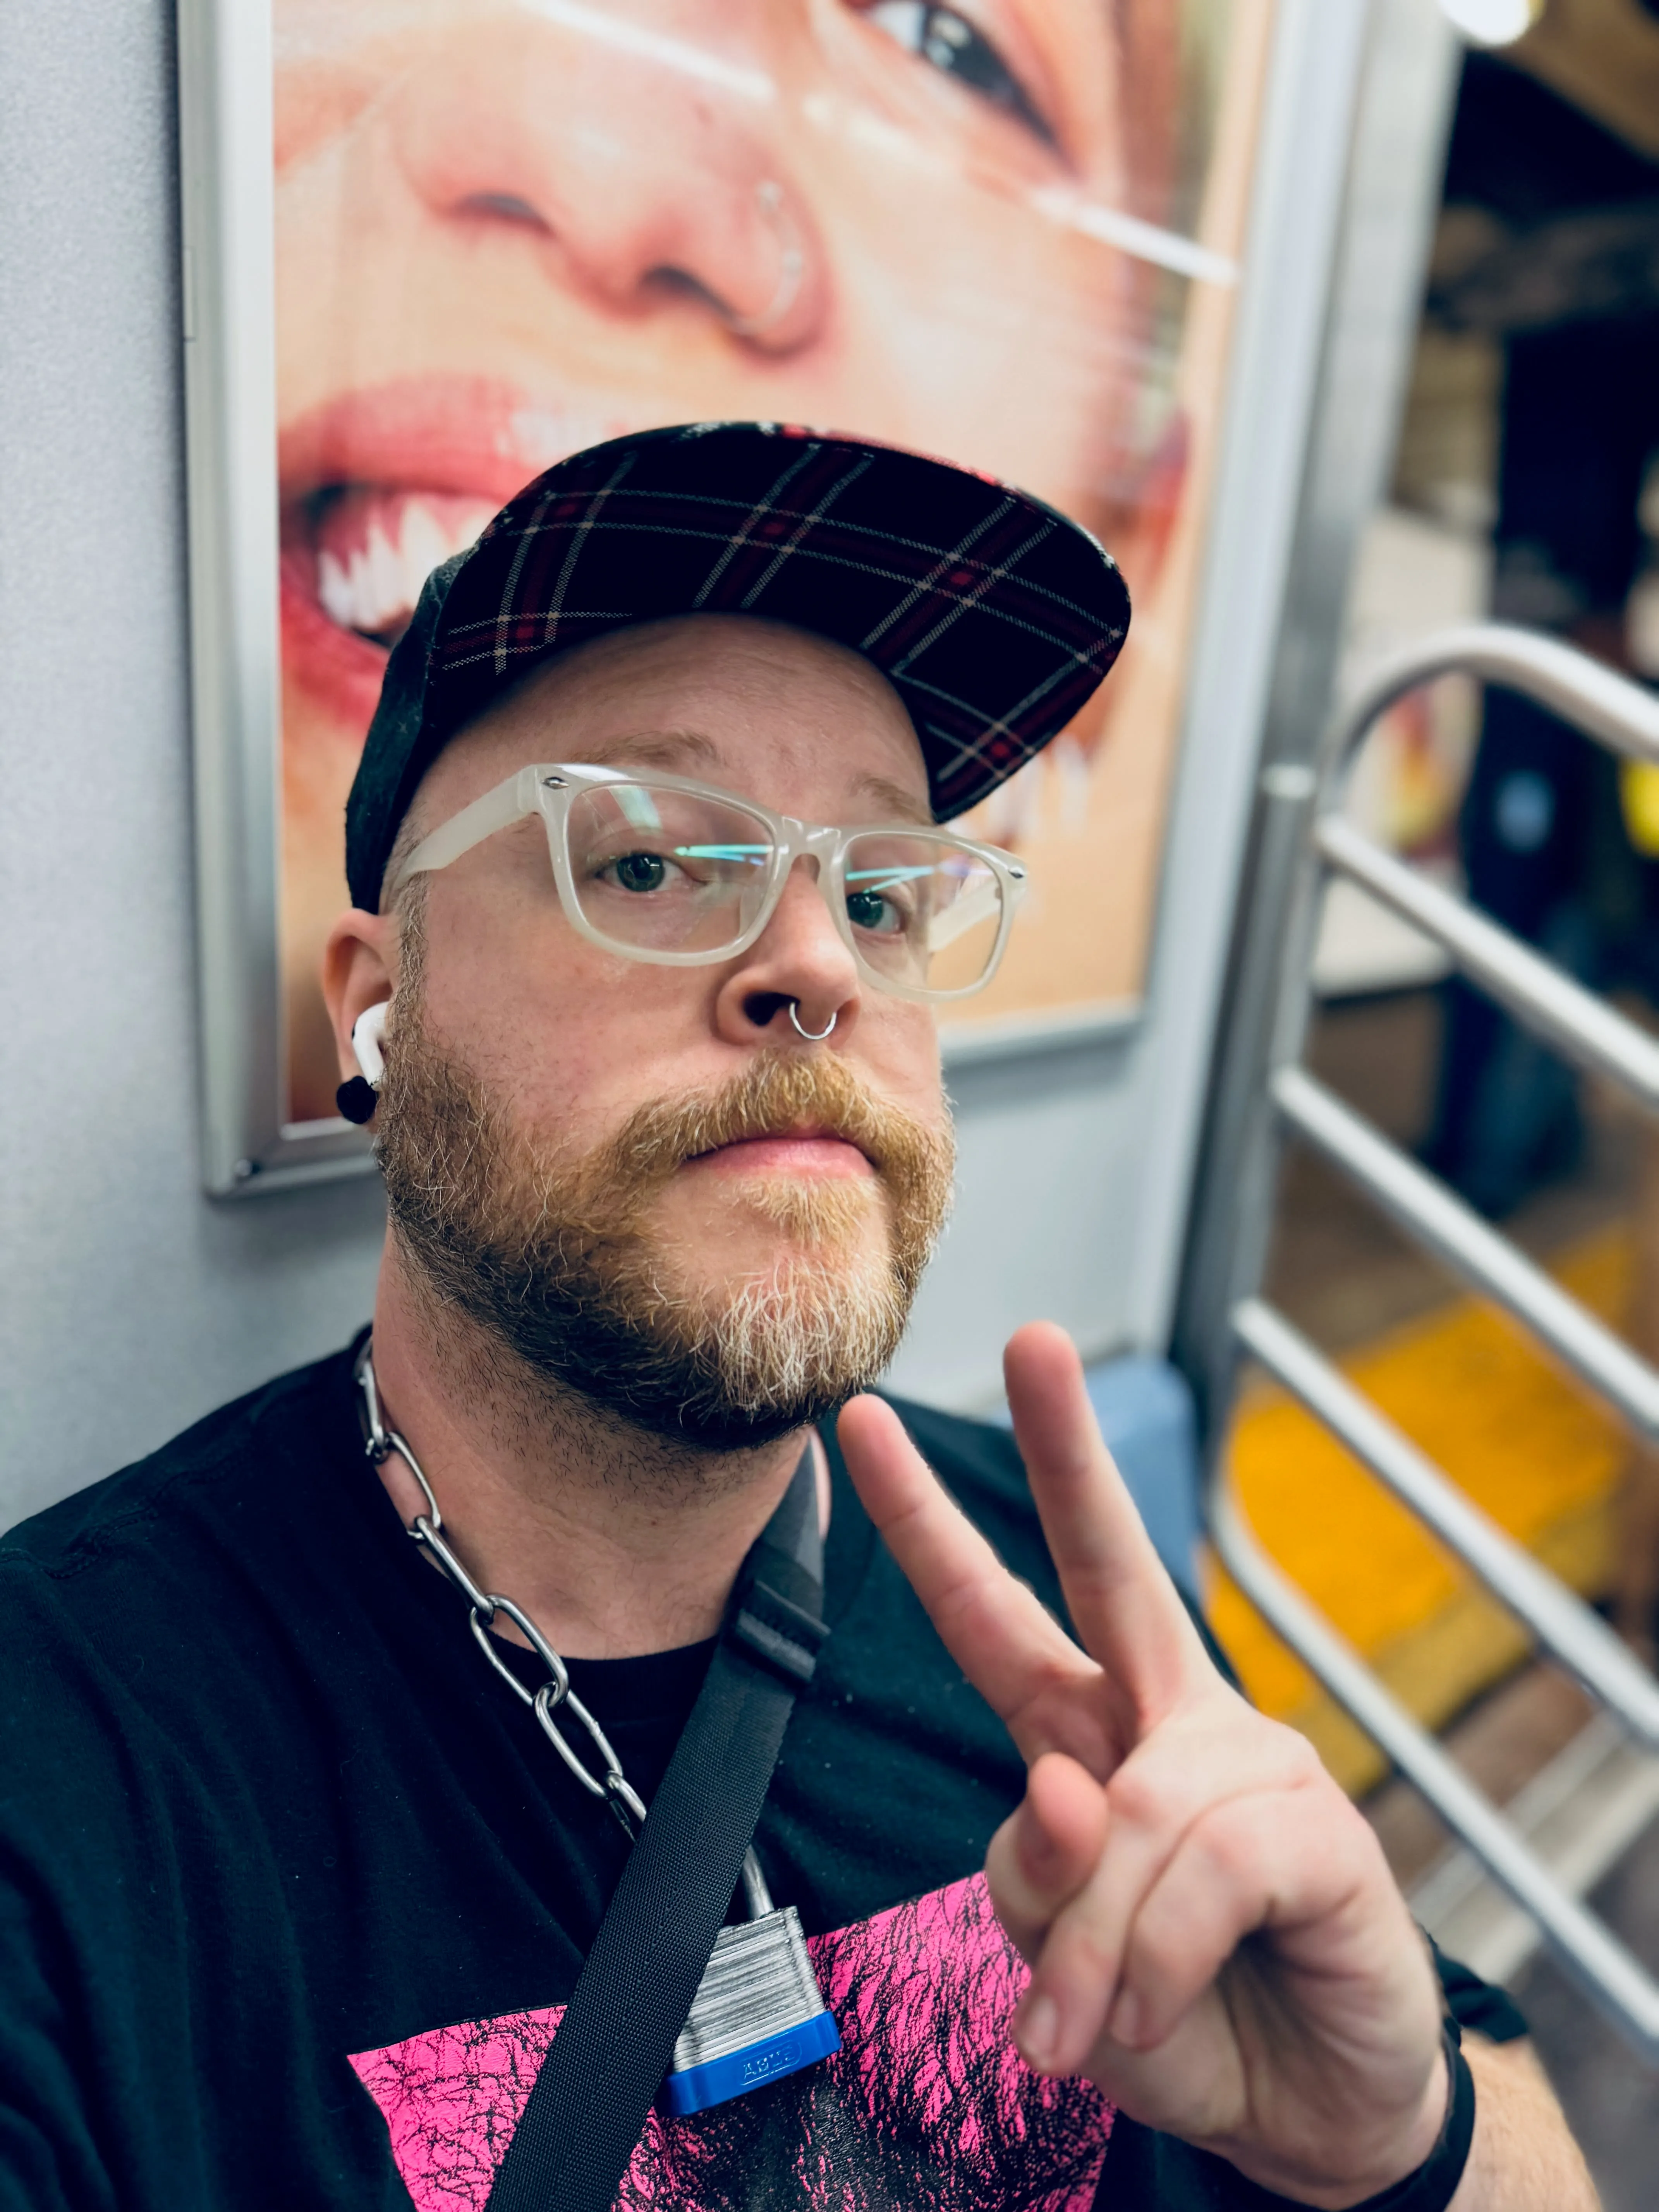 Selfie of me, a white masculine-presenting person with a red and white beard cropped tight flashing a peace sign. i am wearing a black snapback hat with a plaid brim, clear/white glasses, a septum ring, and a black t-shirt with a pink triangle showing a hairy illustrated chest. On top of that is my Sir’s chain and padlock collar around my neck. i’m flashing a peace sign to the camera as i sit in an open C train in New York.